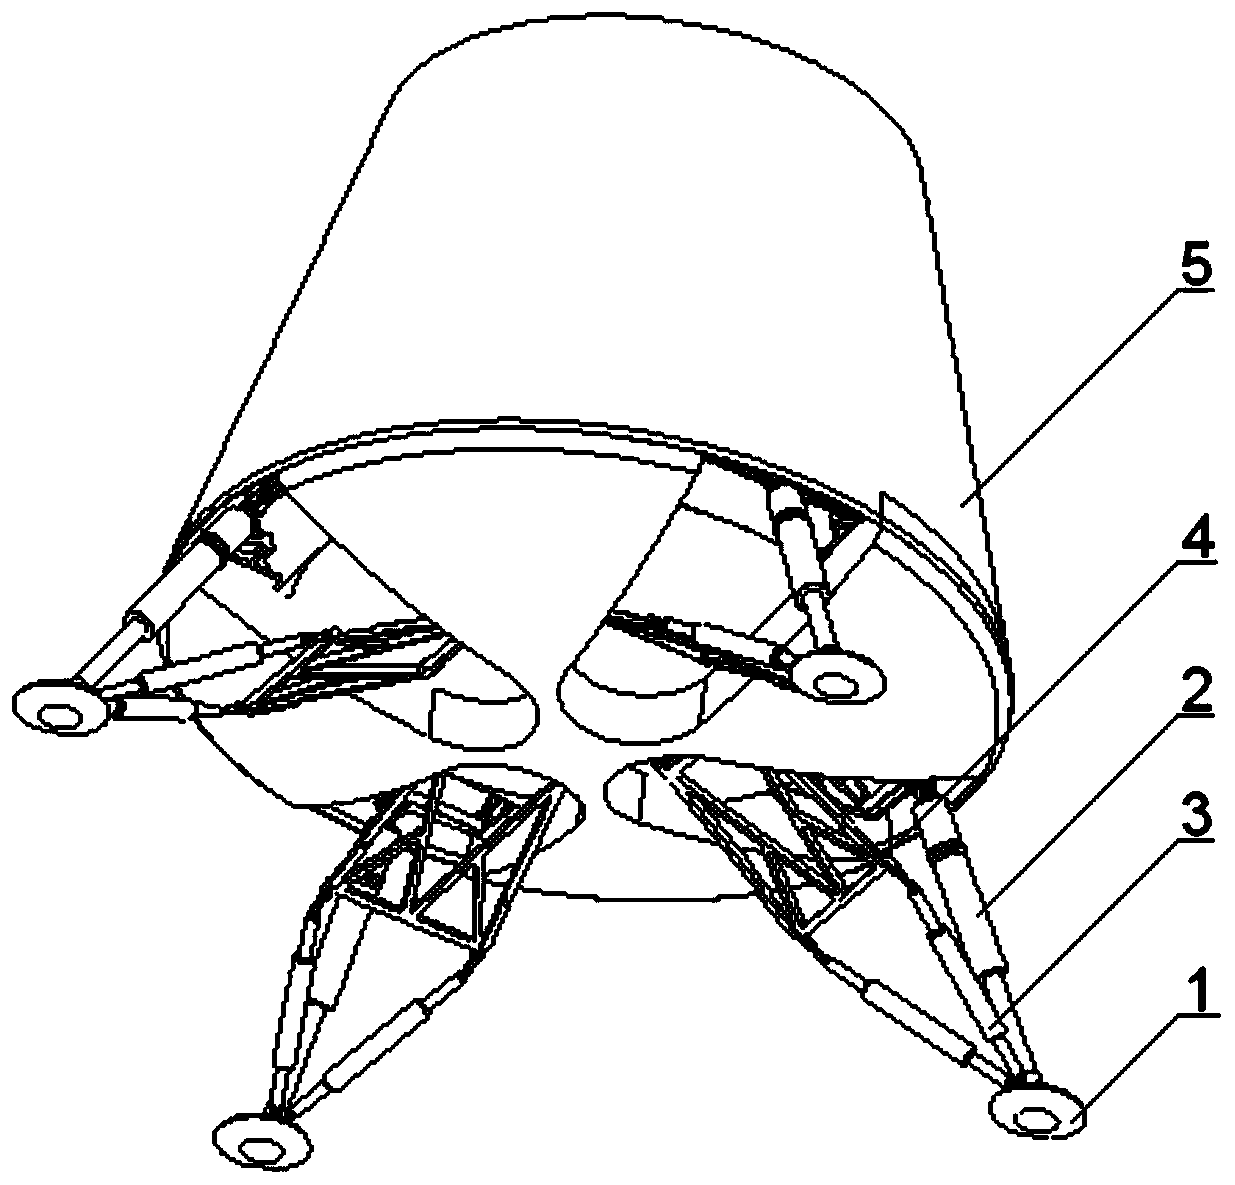 A reusable landing buffer support for an inverted triangle spacecraft